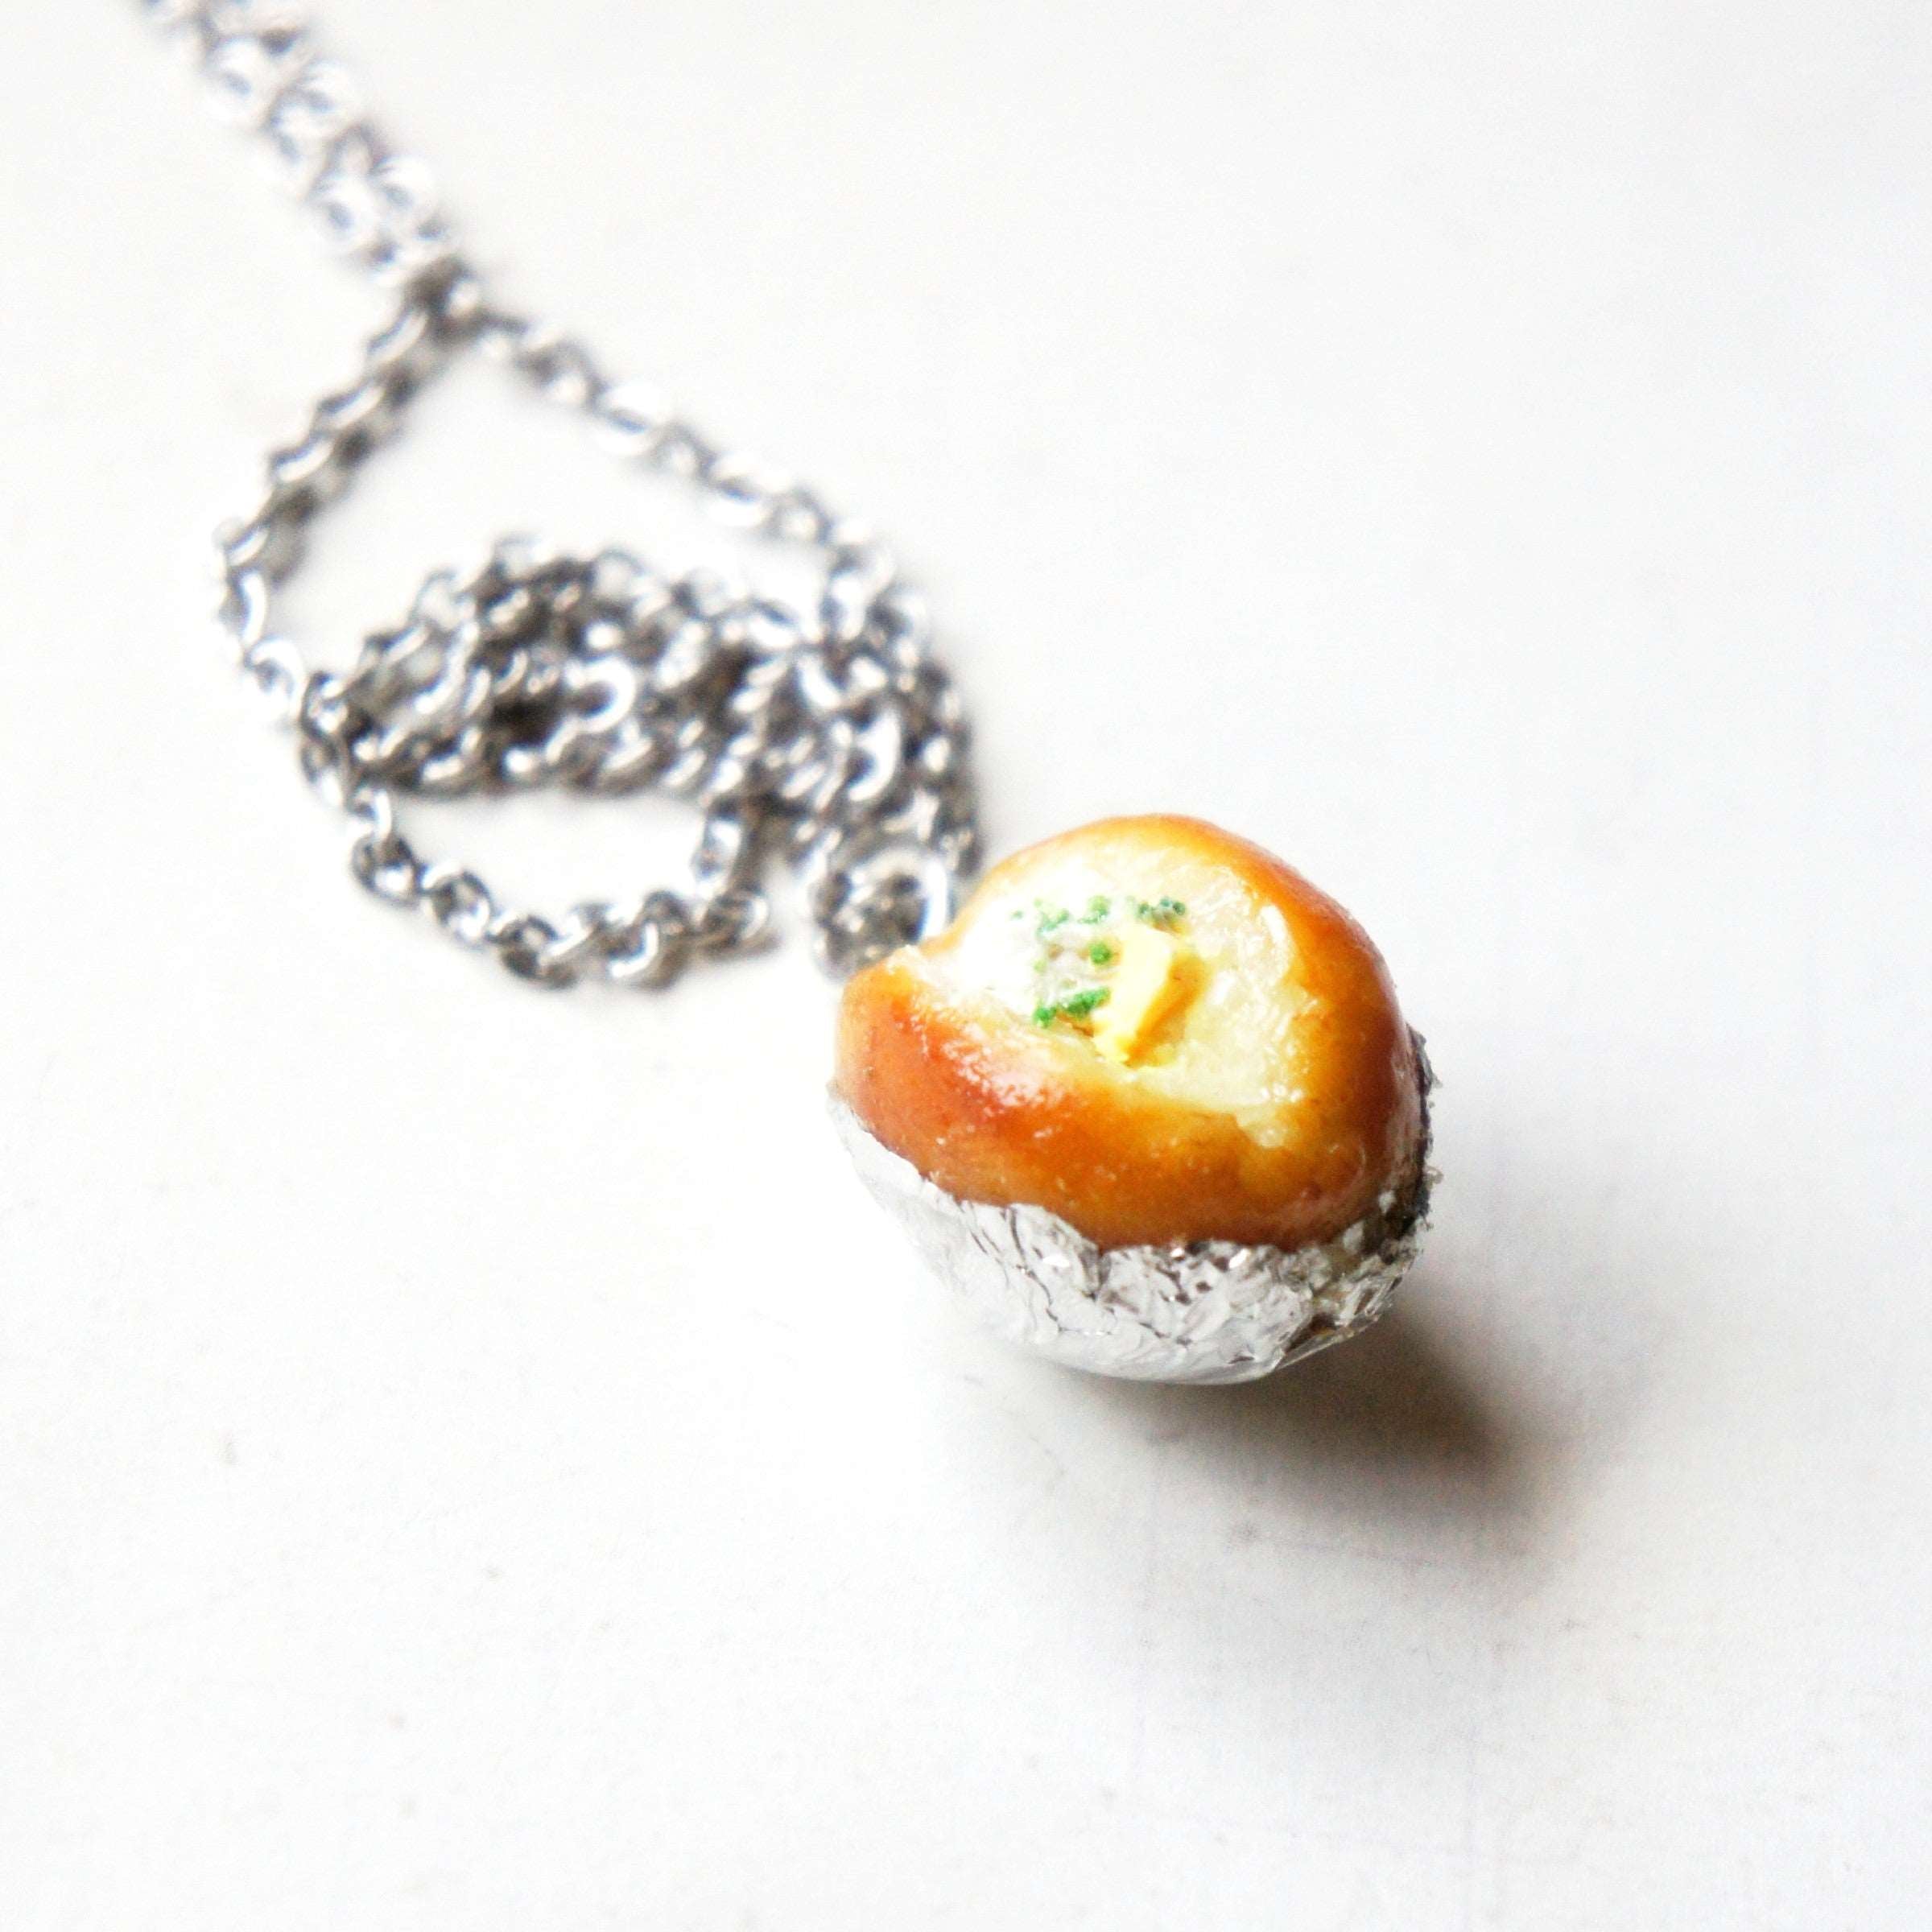 Baked Potato Necklace - Jillicious charms and accessories